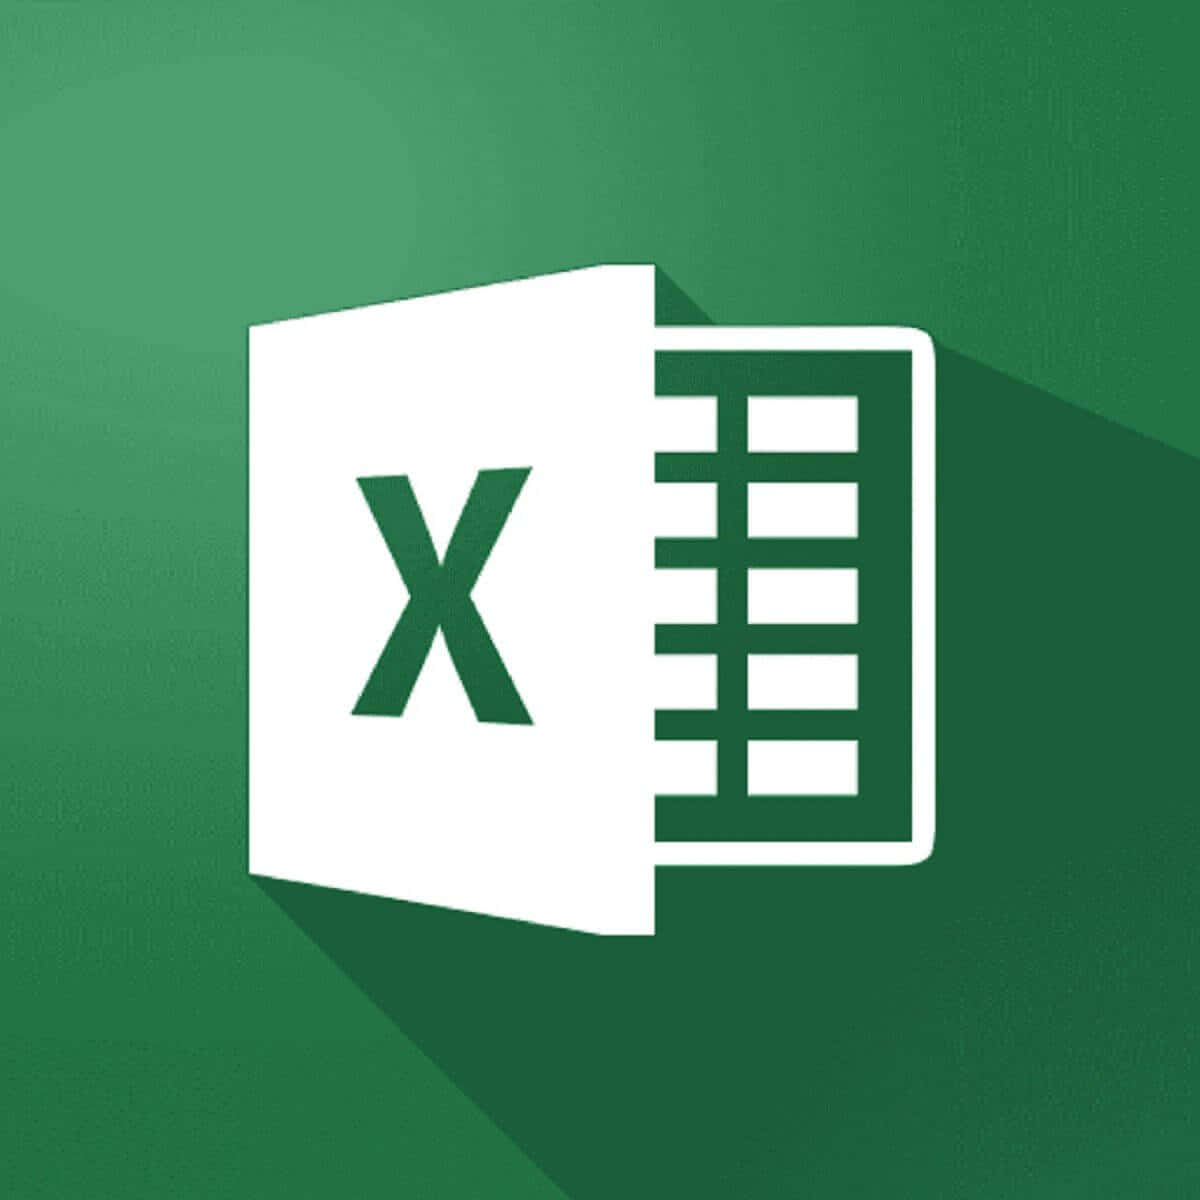 Working with Excel in office